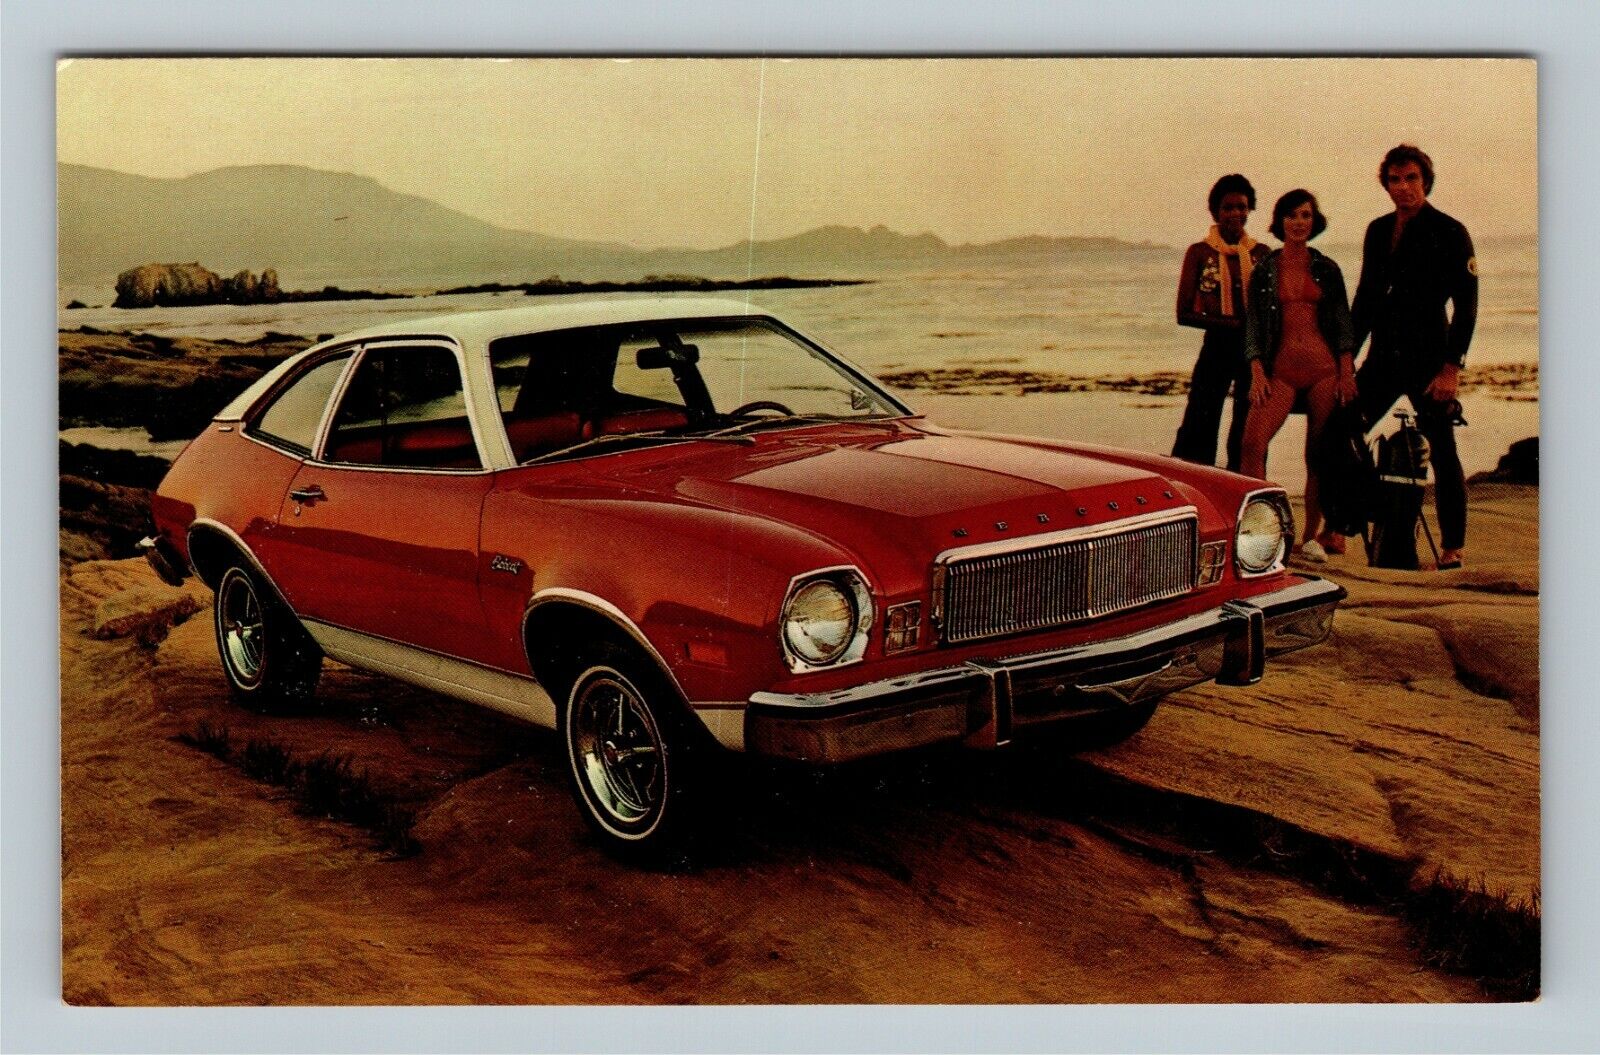 Automobile-1976 Ford Bobcat 3-Door Runabout, Red, White Top, Vintage Postcard